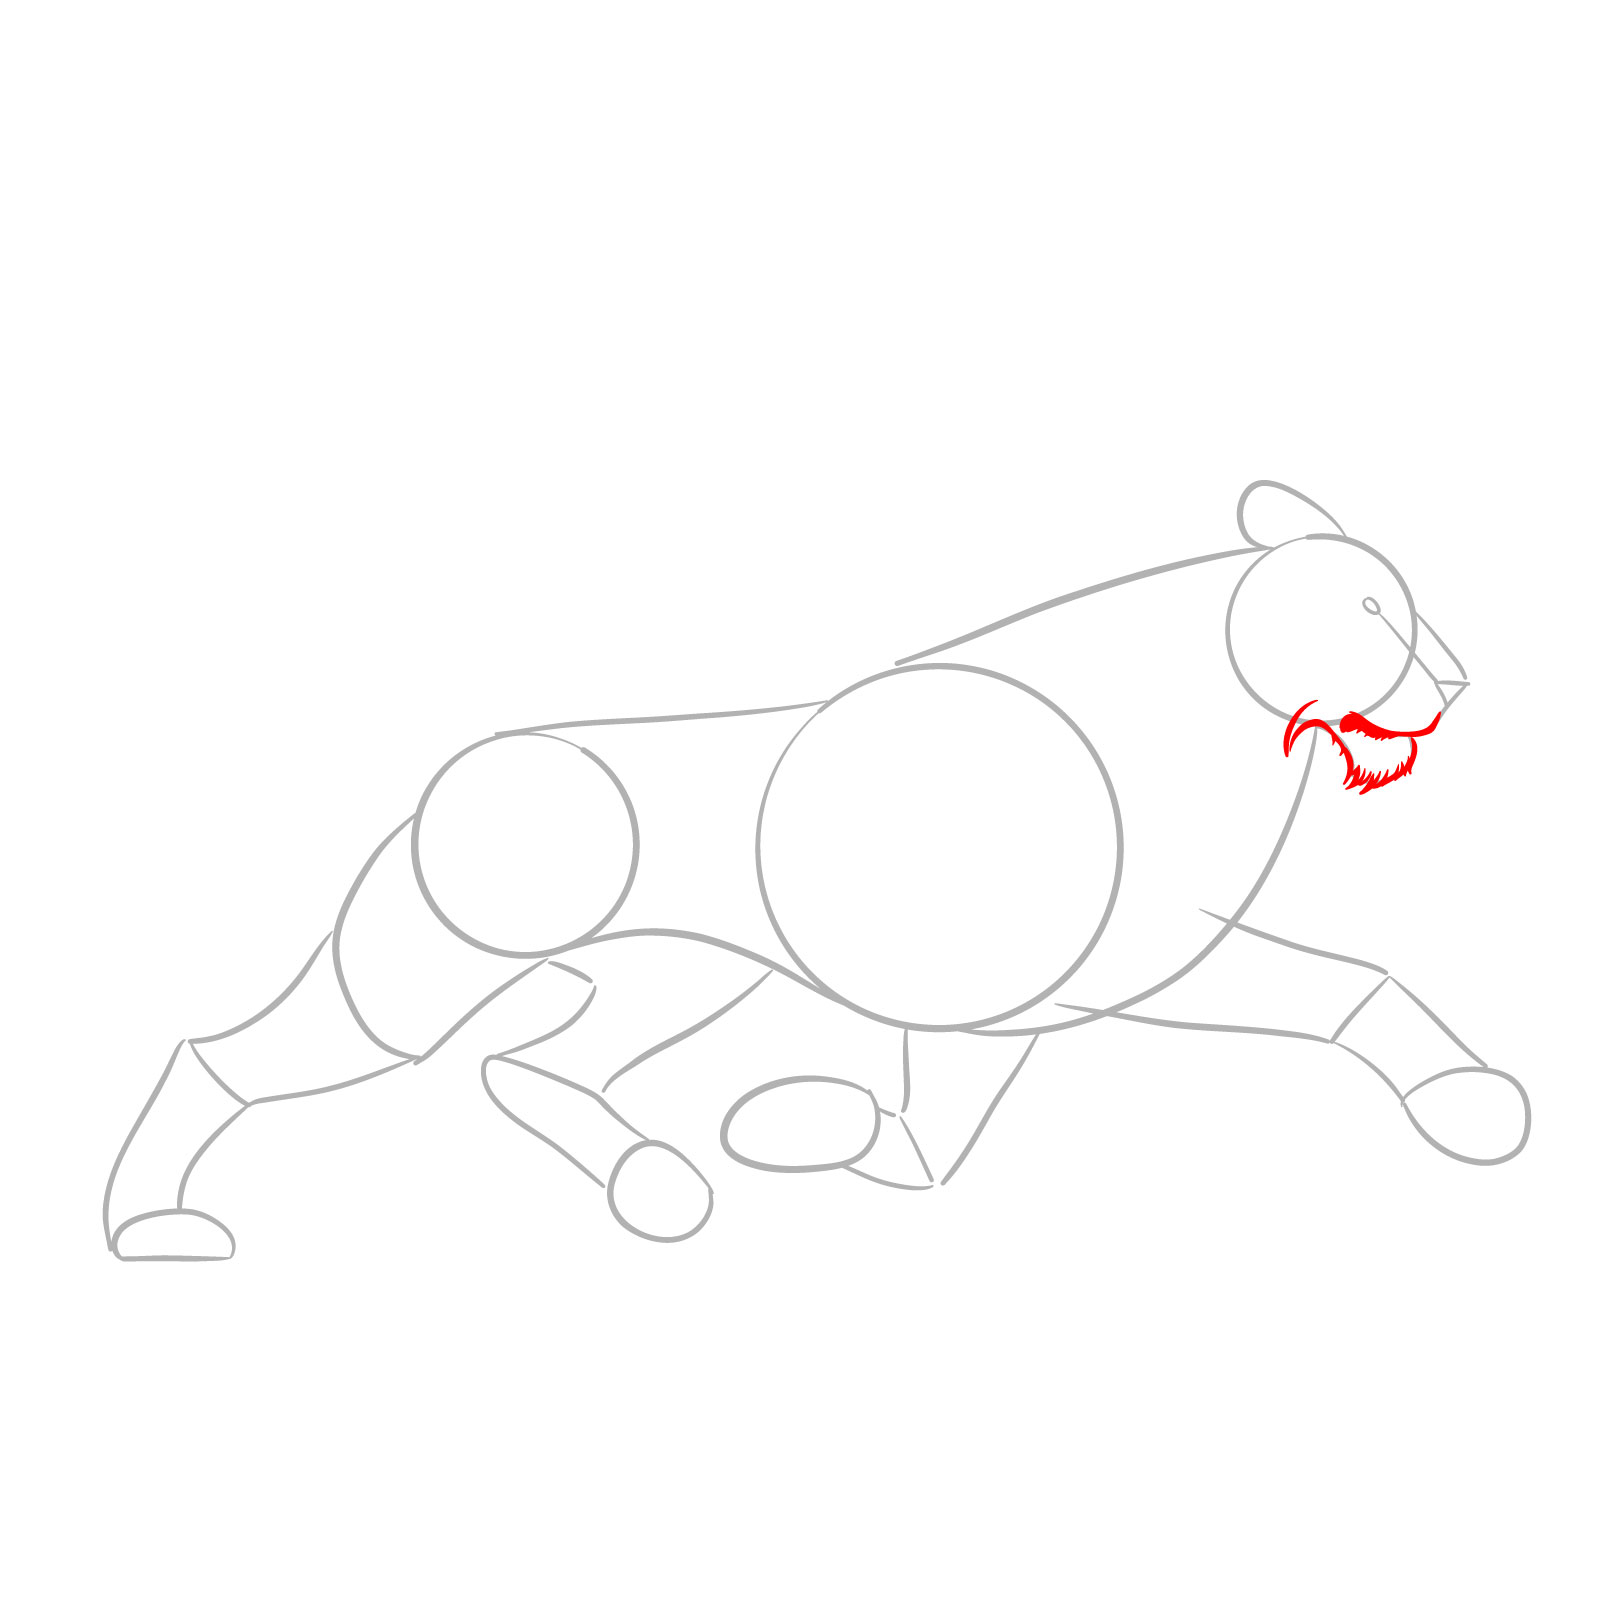 Detailing the lower face of a running lion in side view - step 03